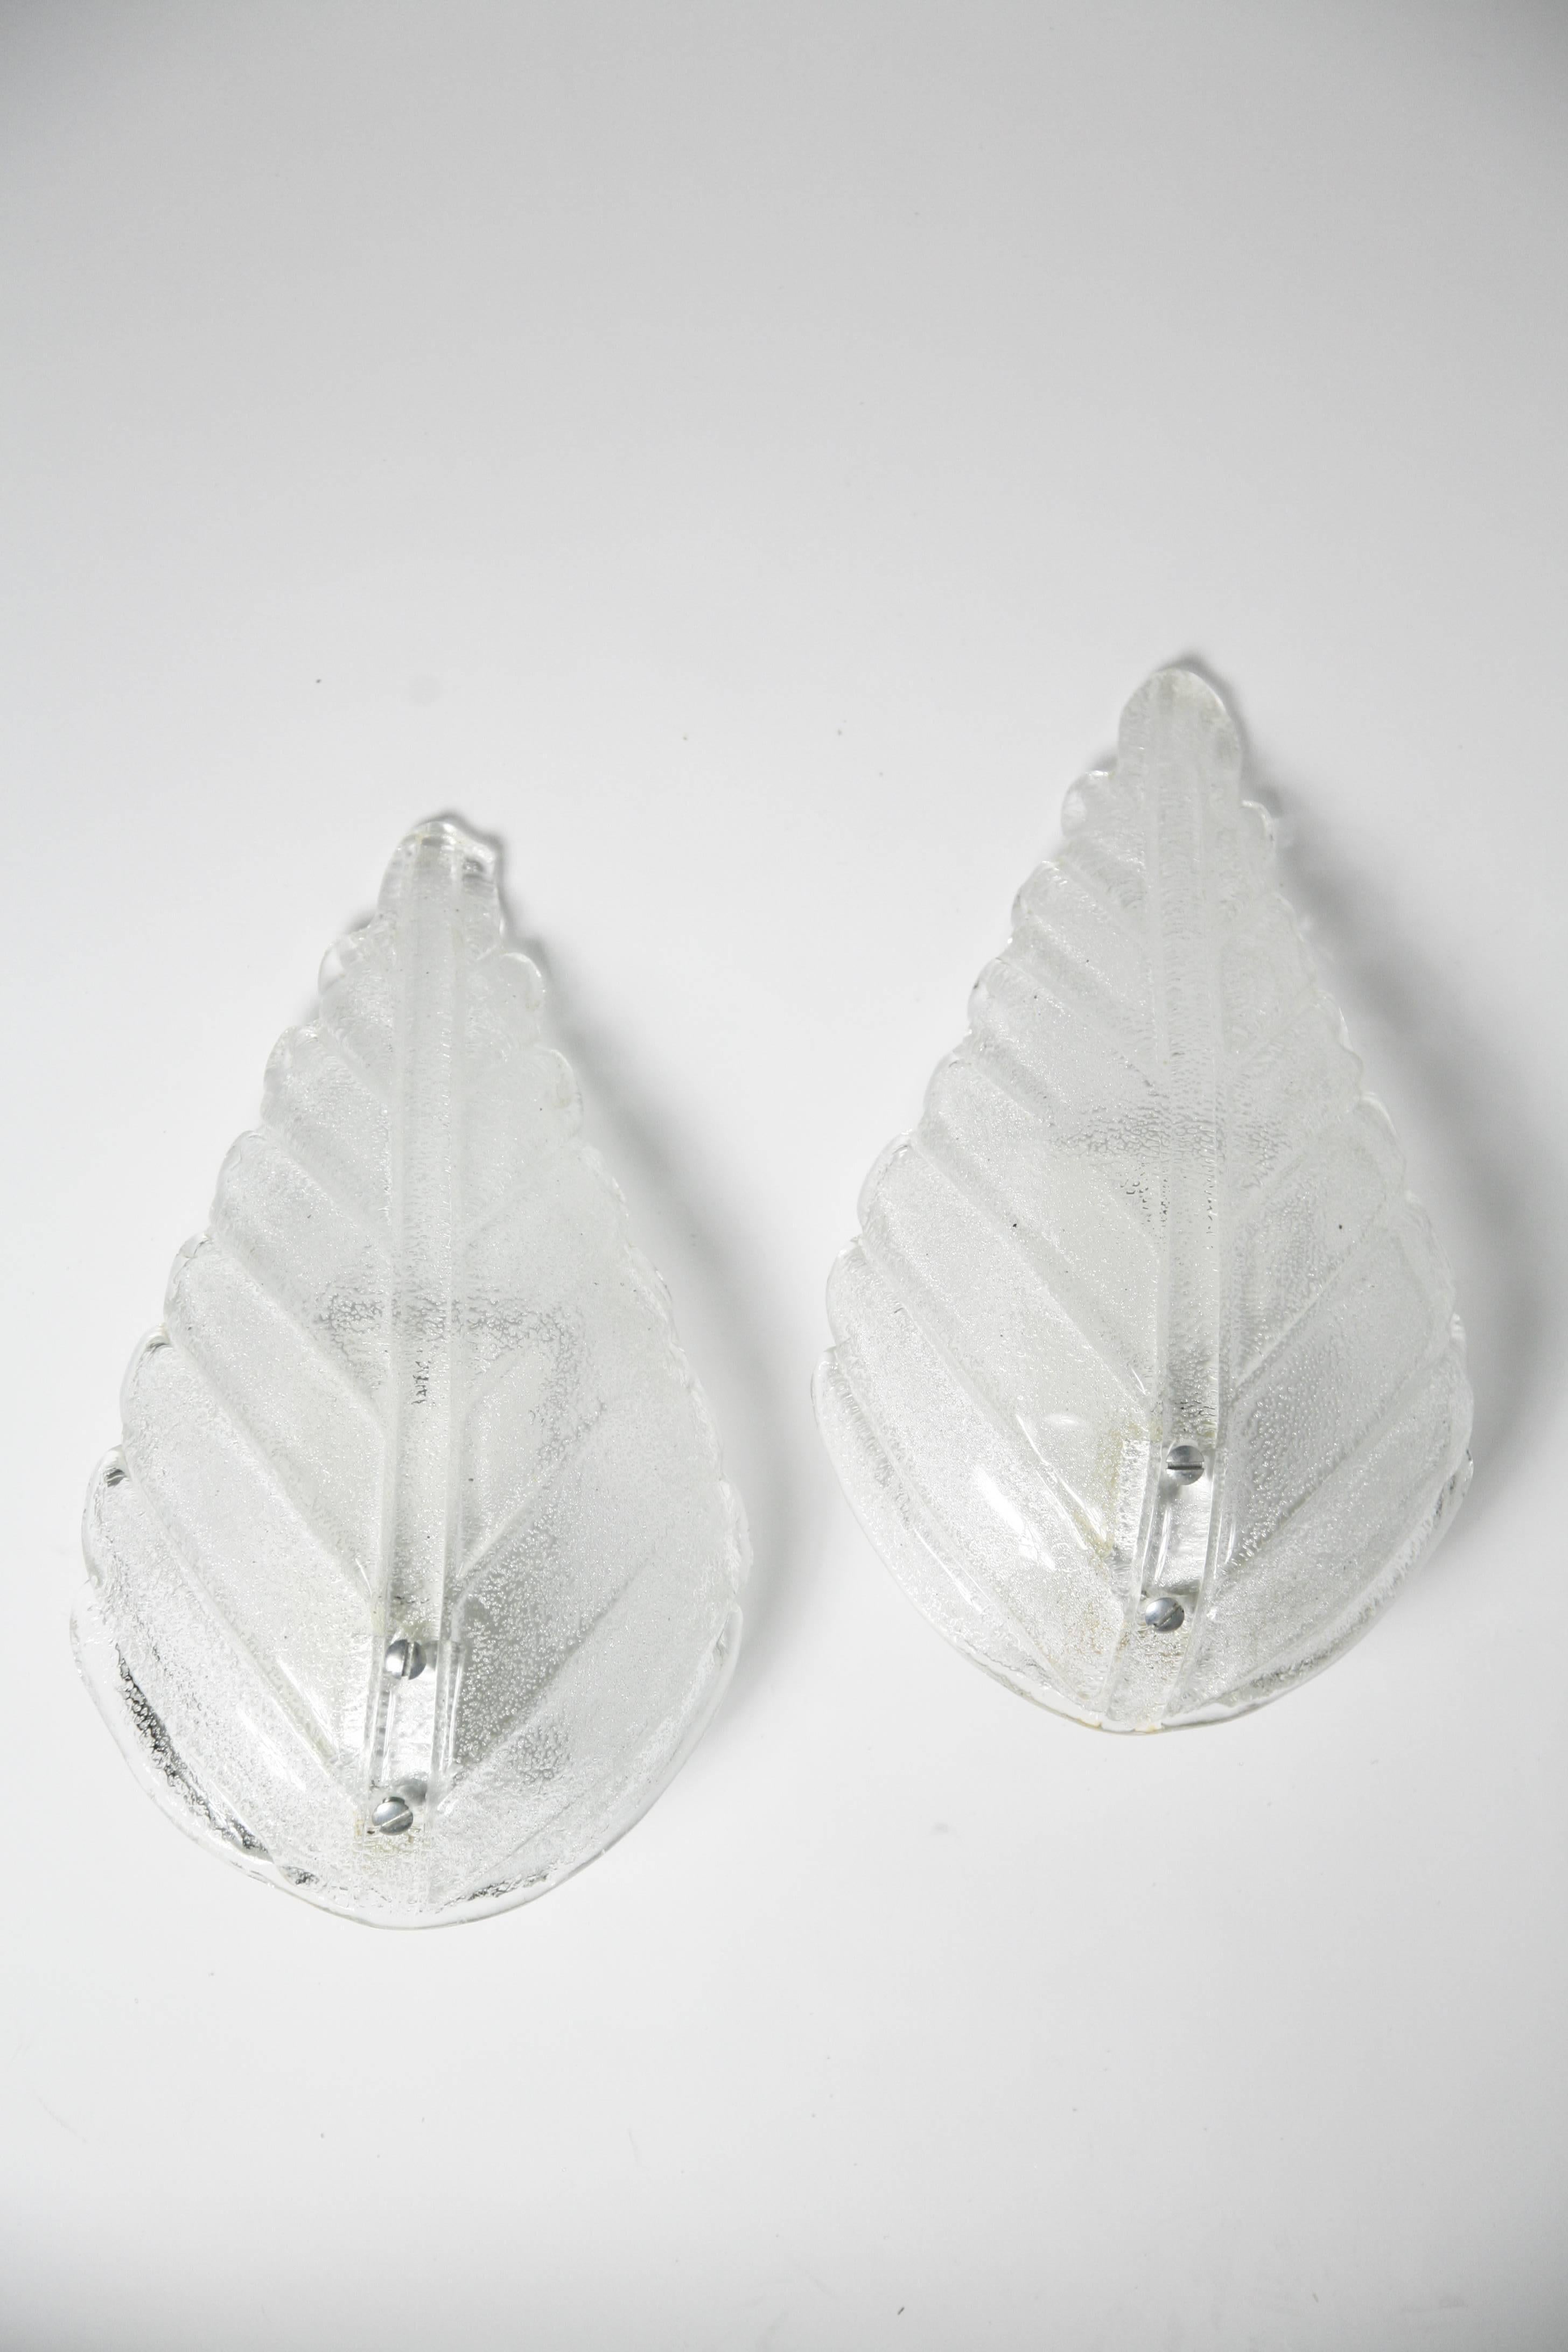 Pair of sconces by Kaiser Leuchten from 1970s white enameled back plates and a shade of glass shaped as a leaf, on the inside are tiny glass pieces the size of cane sugar which makes them sparkle, holds one candelabra socket each.
Comes with silver